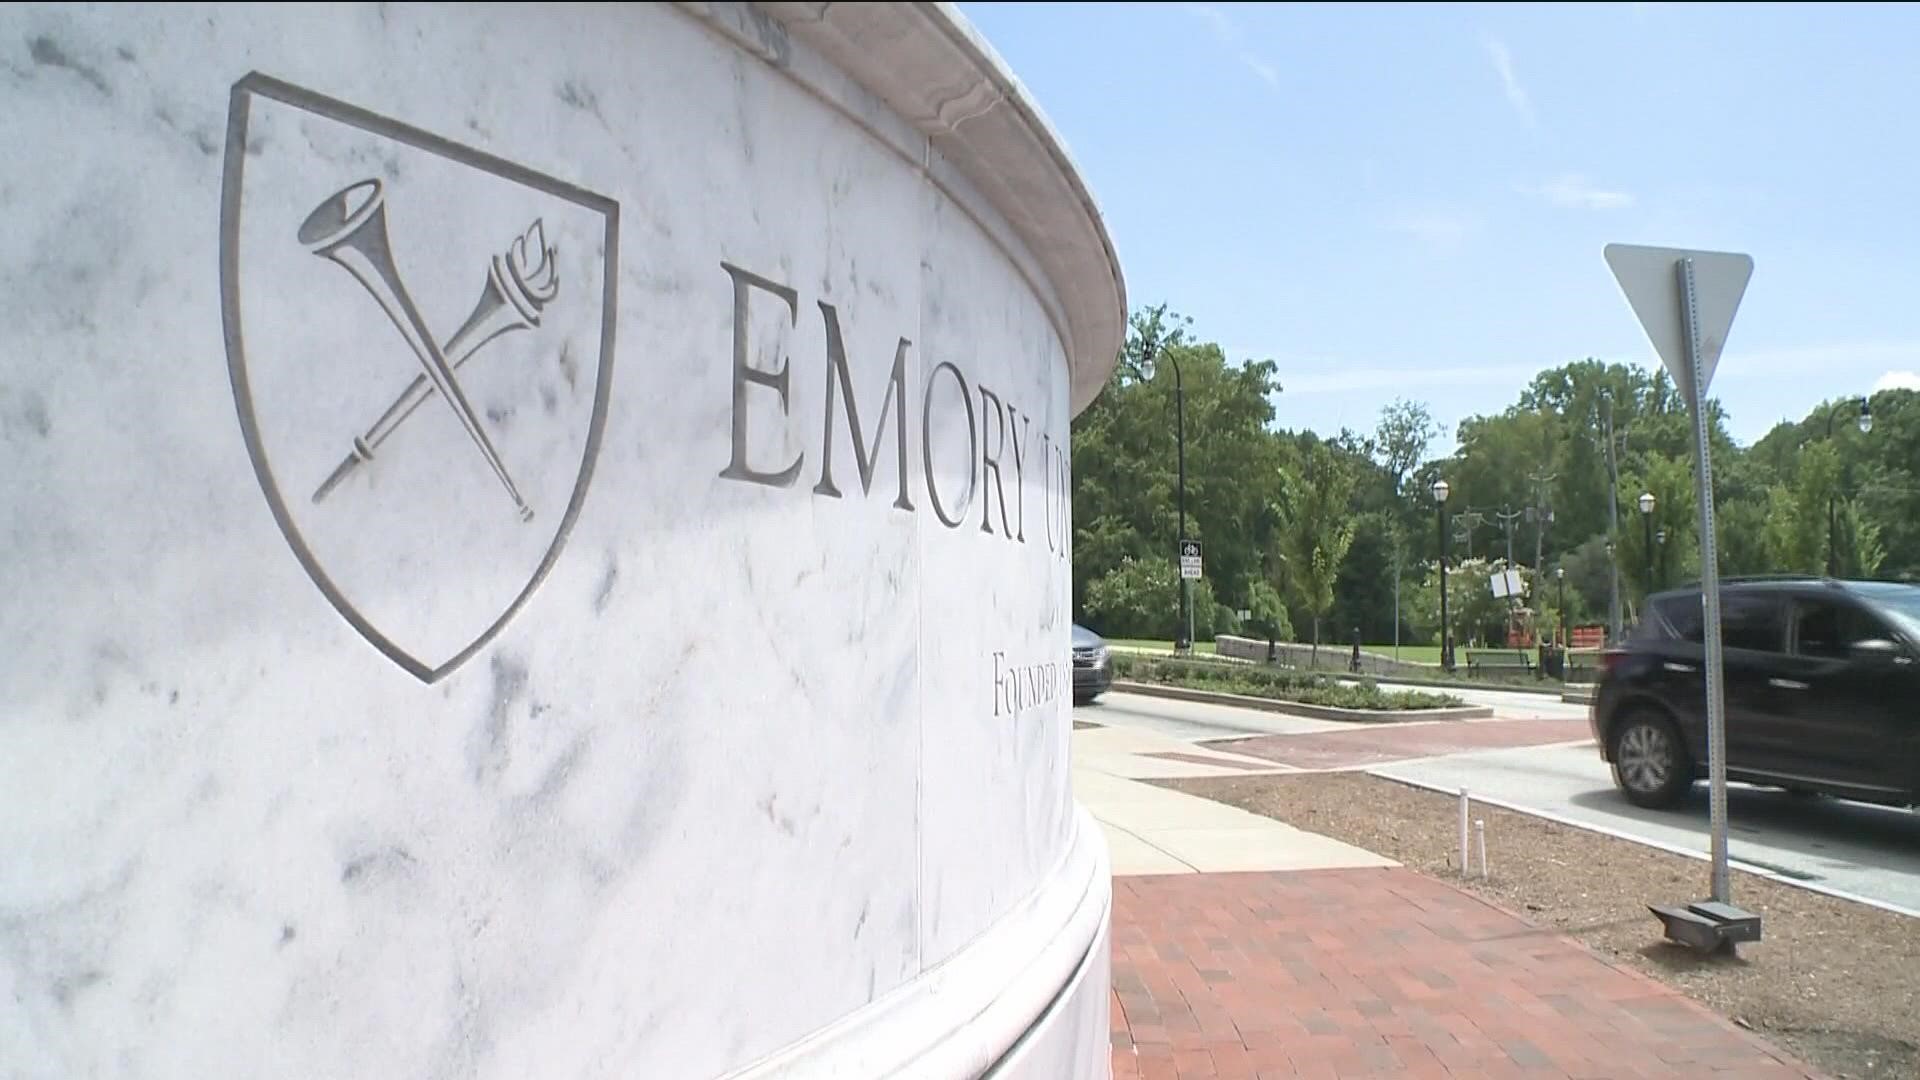 Emory is changing the names of two of its institutions because of the men they're named after.